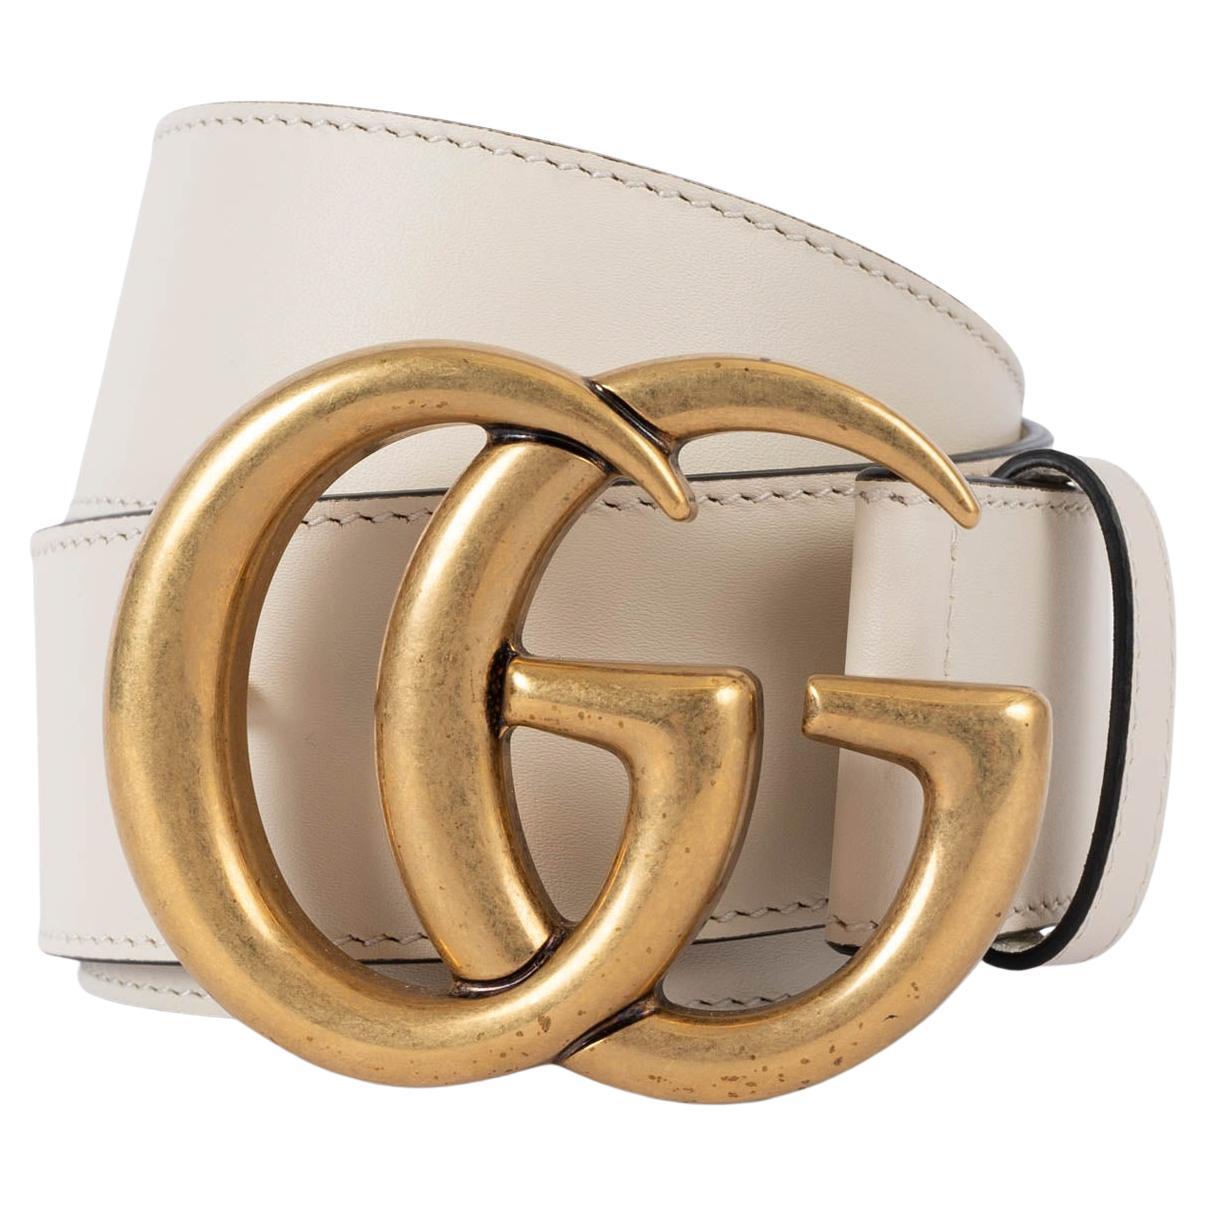 GUCCI cream leather GG MARMONT Belt 85 For Sale